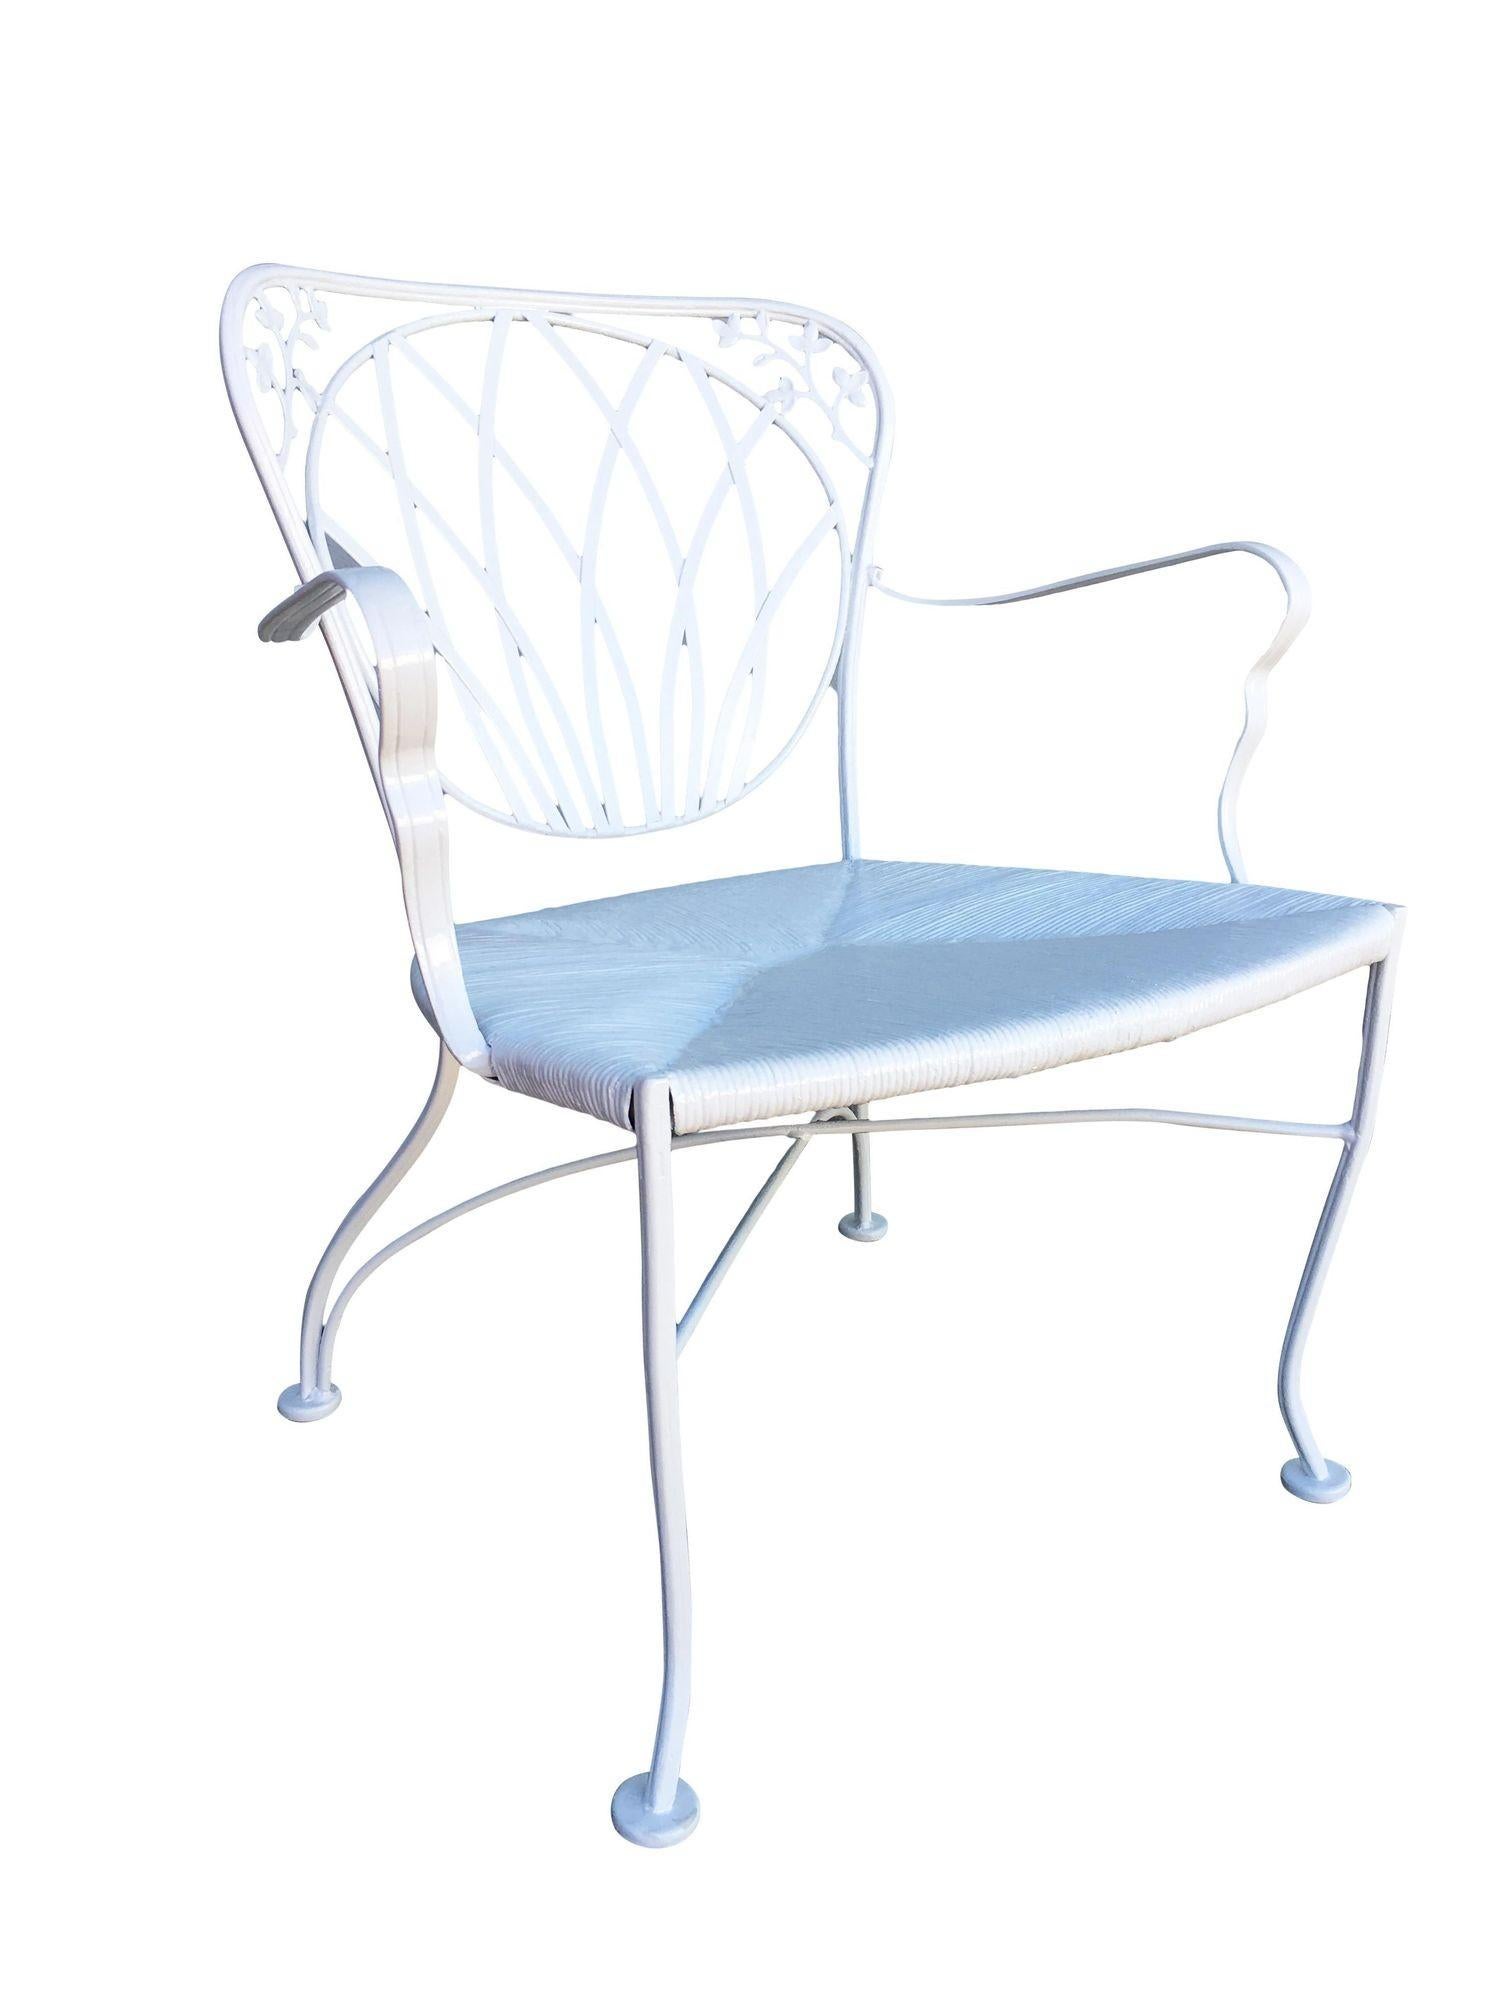 Set of 4 Woodard rod iron outdoor/patio chair with a distinct Art Nouveau backrest. This chair is constructed with solid core iron castings and is finished in your choice of a pure white or black finish with padded seats, circa 1950. All outdoor